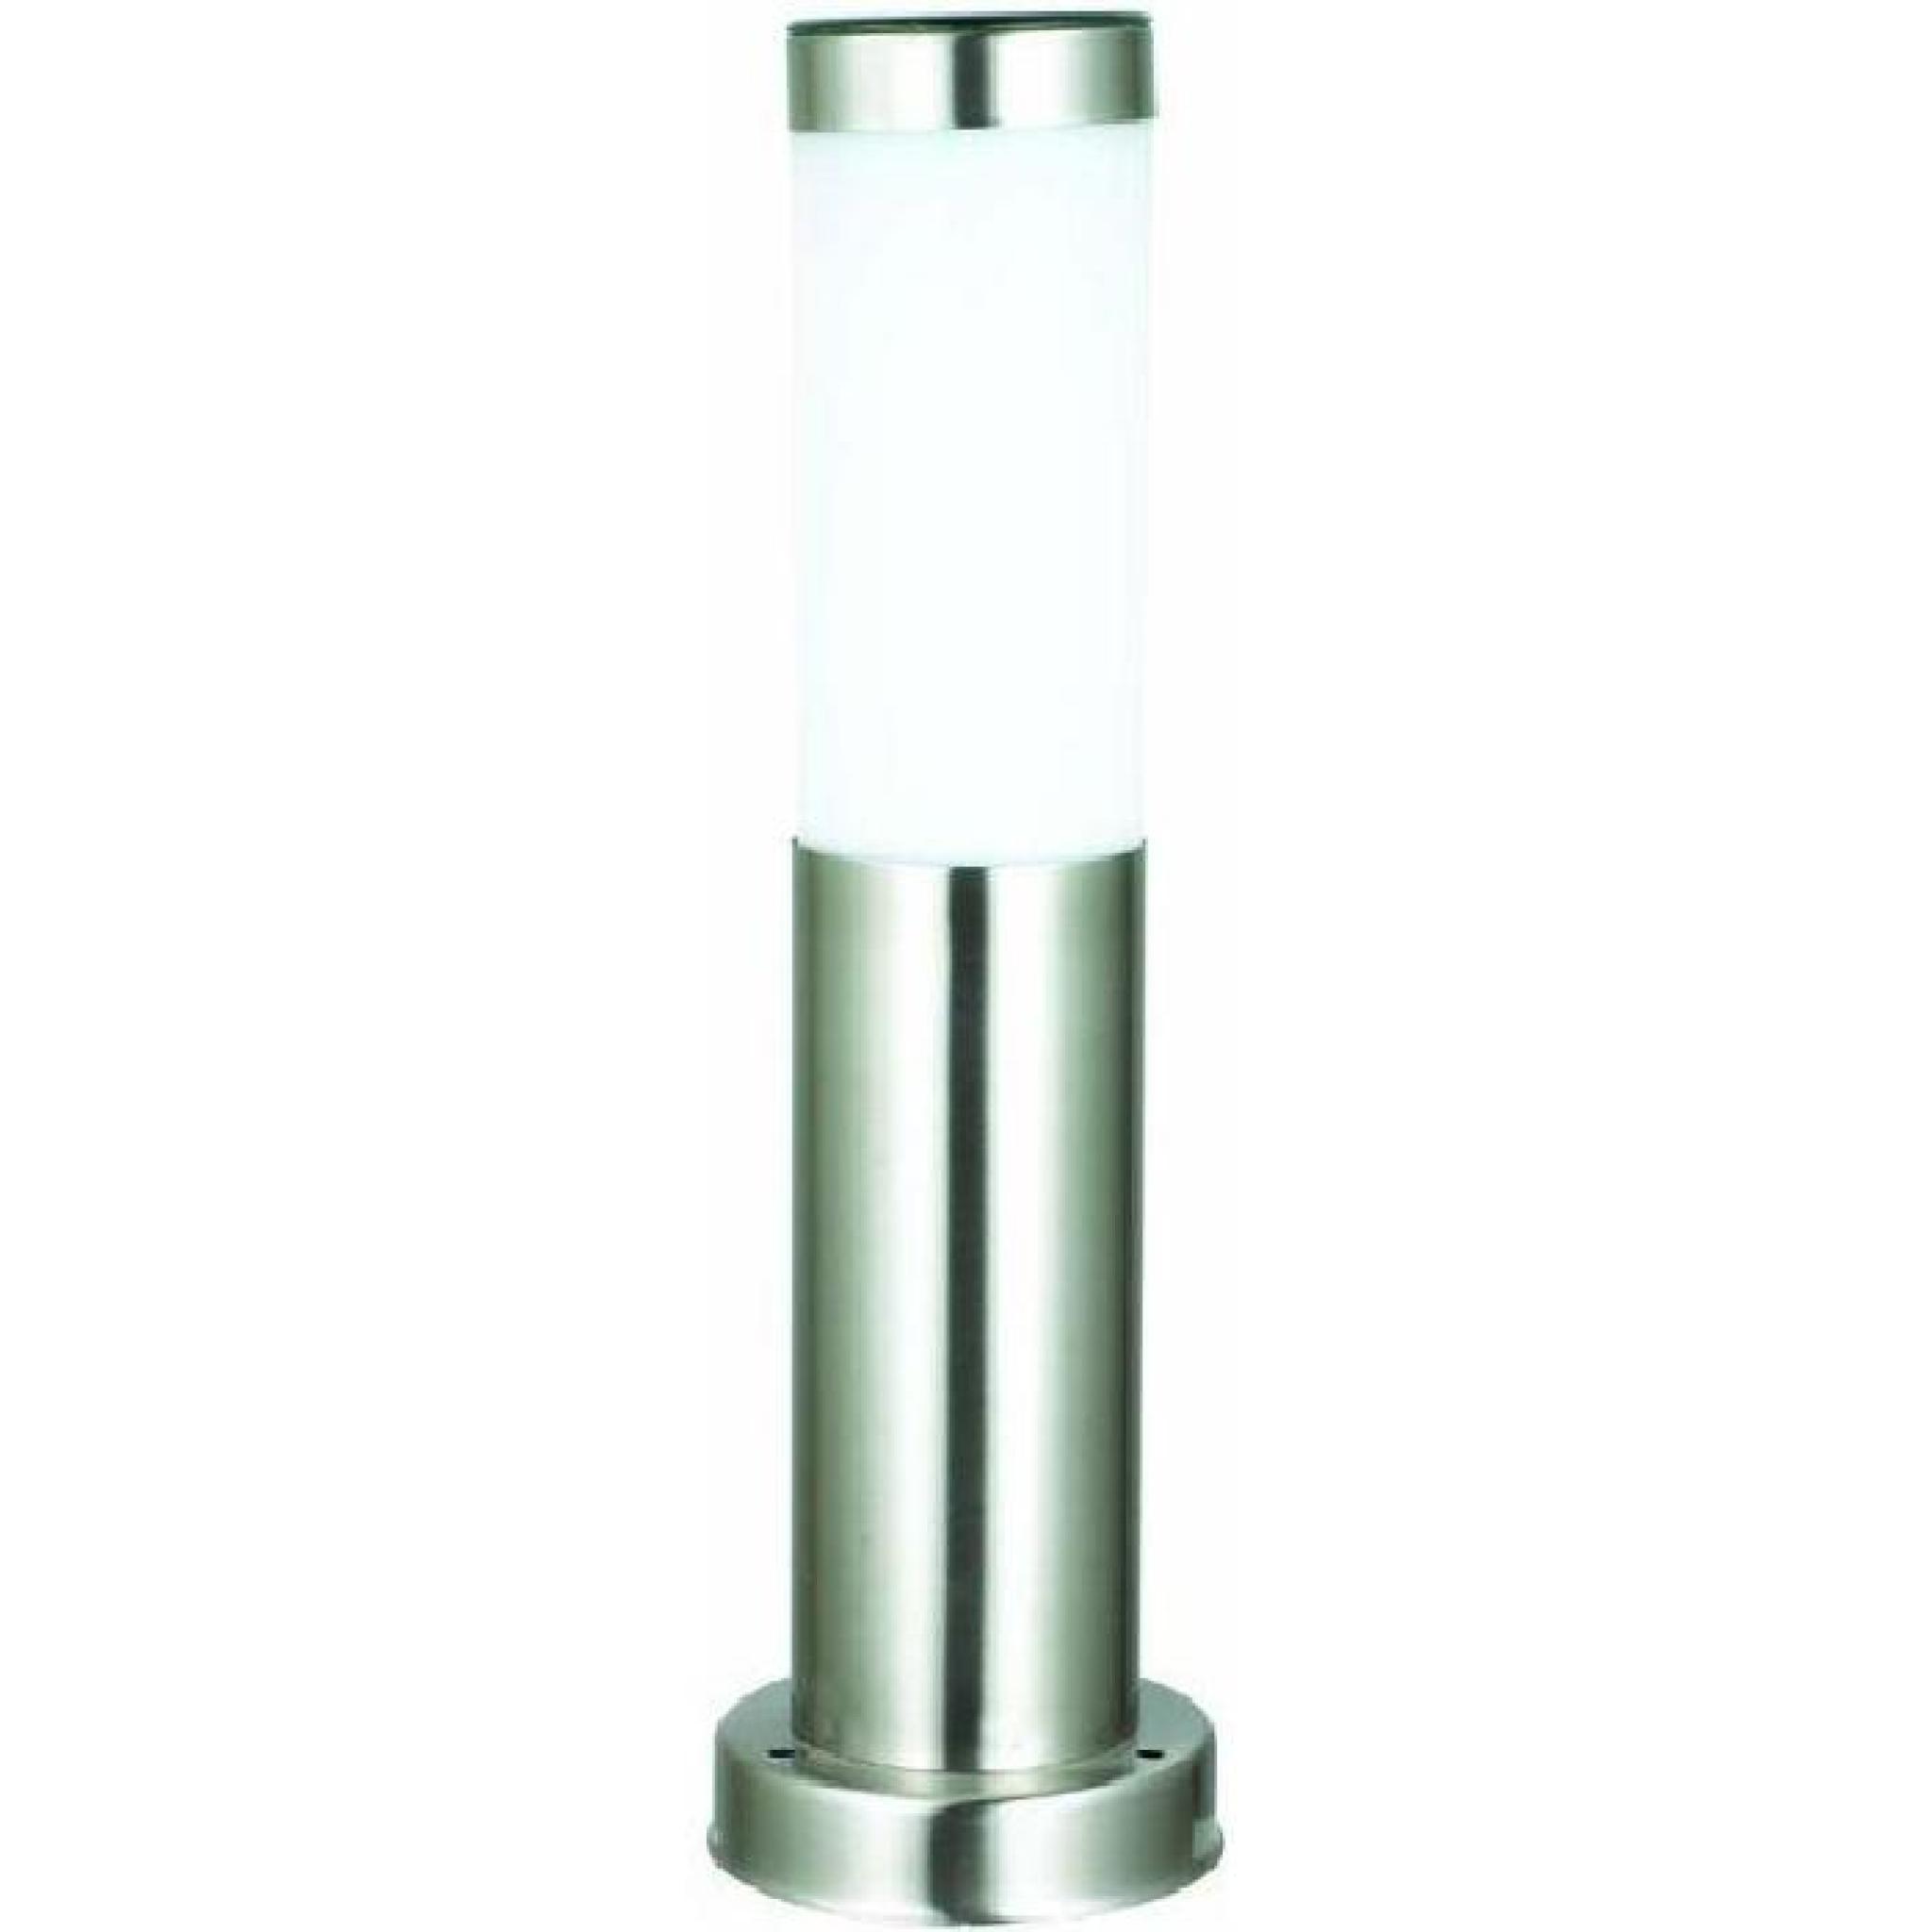 BALISE SOLAIRE CYLINDRO